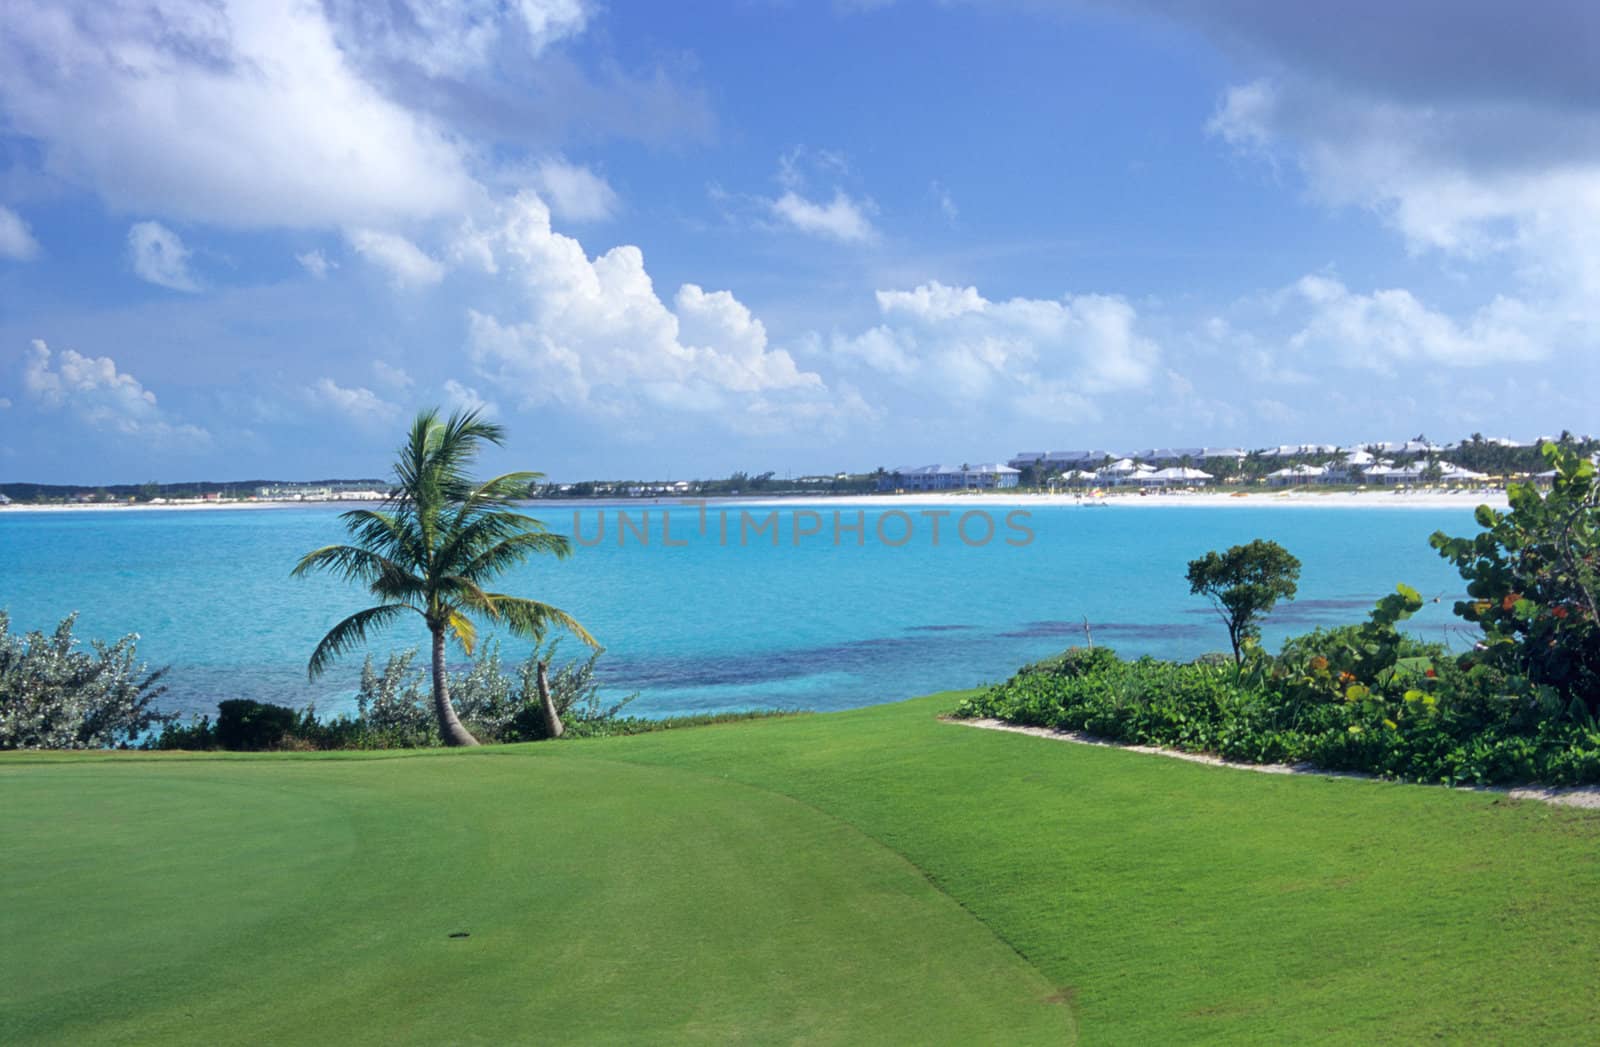 The view from the 18th hole at a tropical golf course.